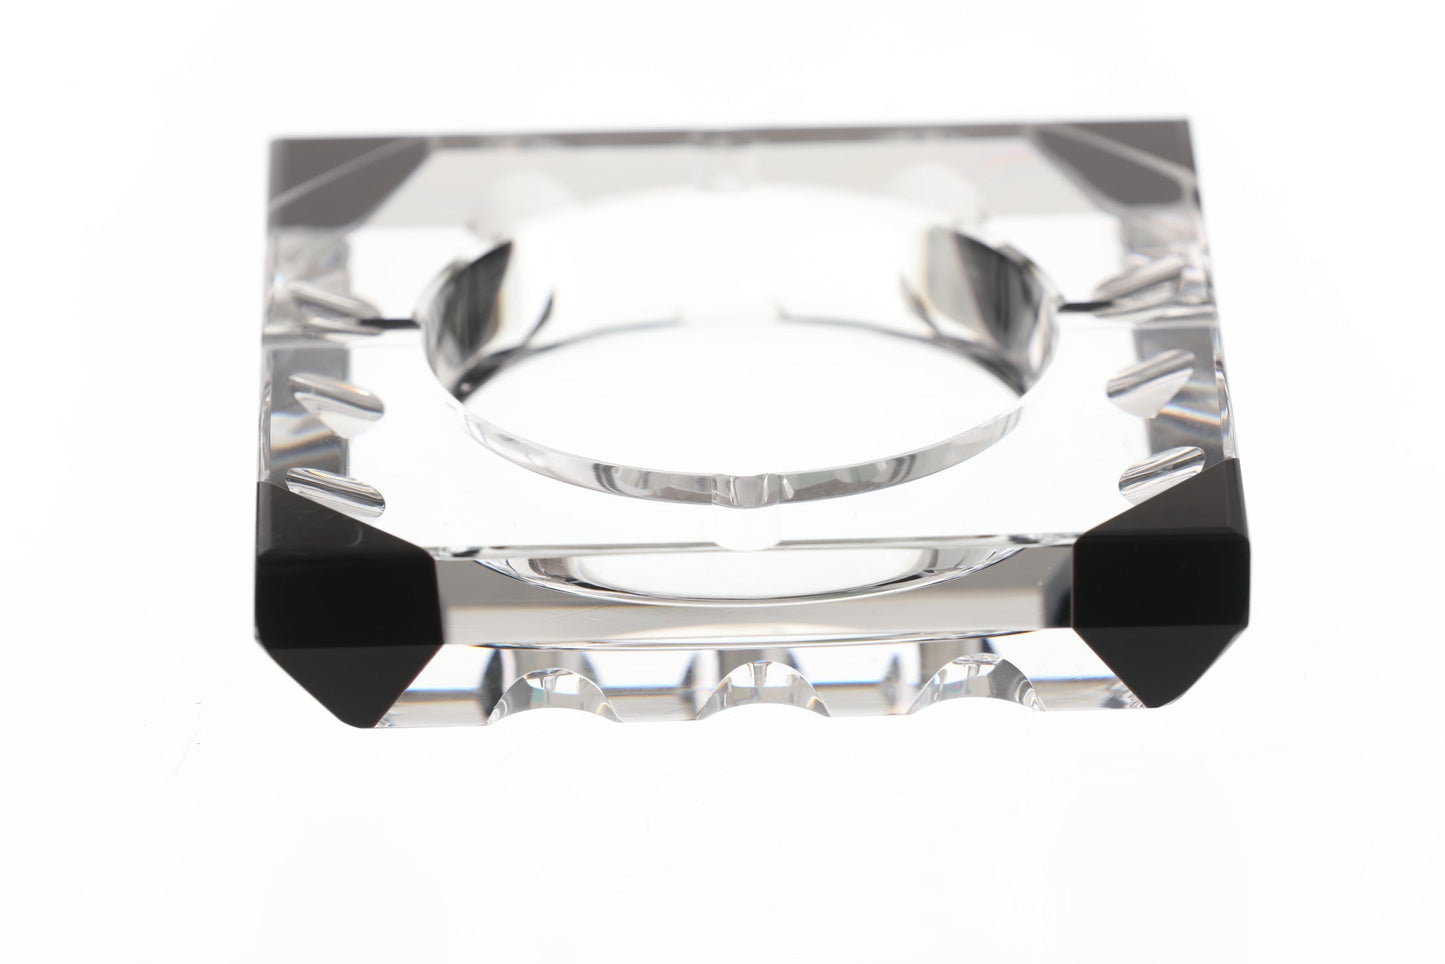 Crystal ashtray with black corners from the 70s